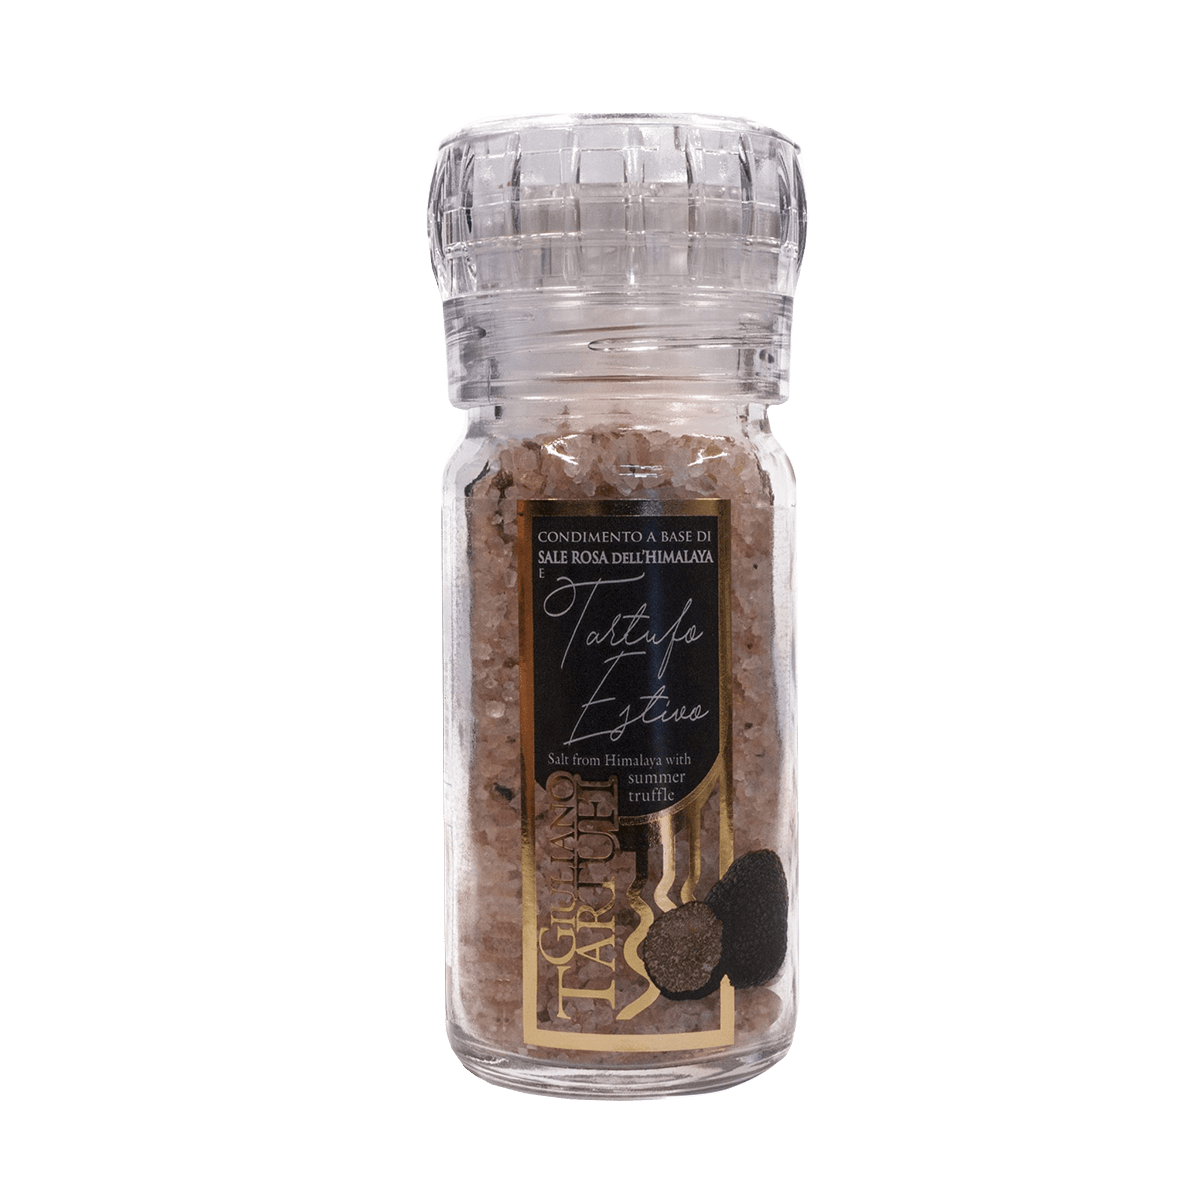 Himalayan salt with summer truffles in a mill